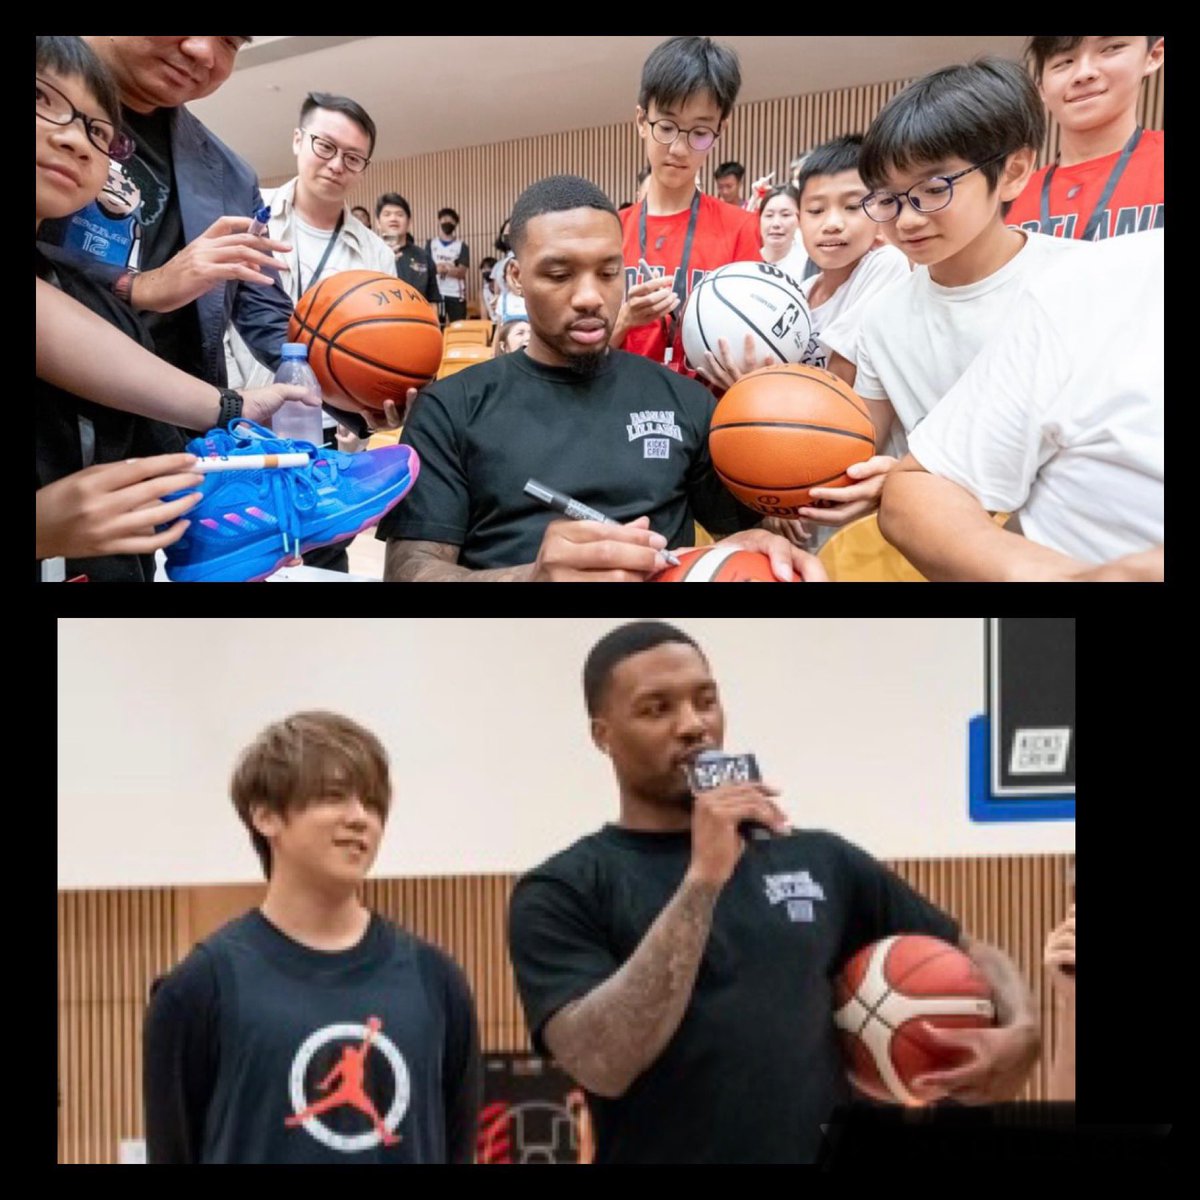 Thank you for coming to Hong Kong Damian Lillard. Fans here are so thrilled. Dreams come true for Keung To to be on the same court with you, and in your team for the short game 🤩🤩🤩

#KeungTo 
@Dame_Lillard
@kickscrew @trailblazers